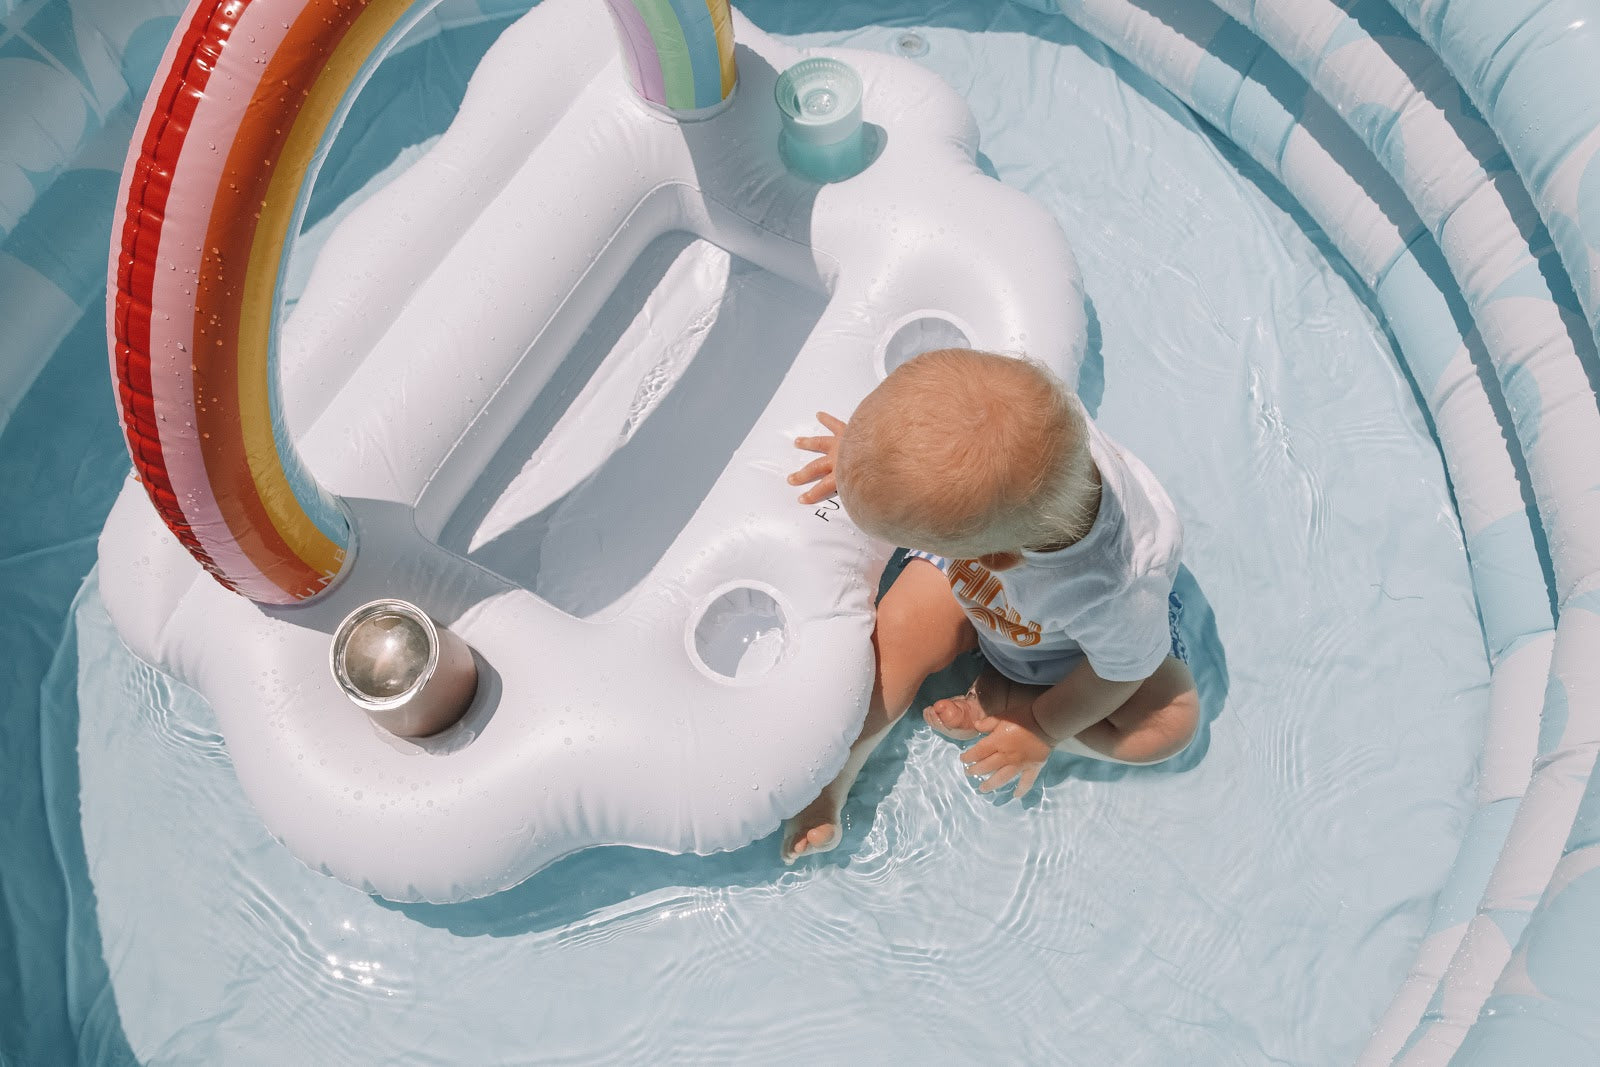 How To Drain A Kiddie Pool Without Making A Mess